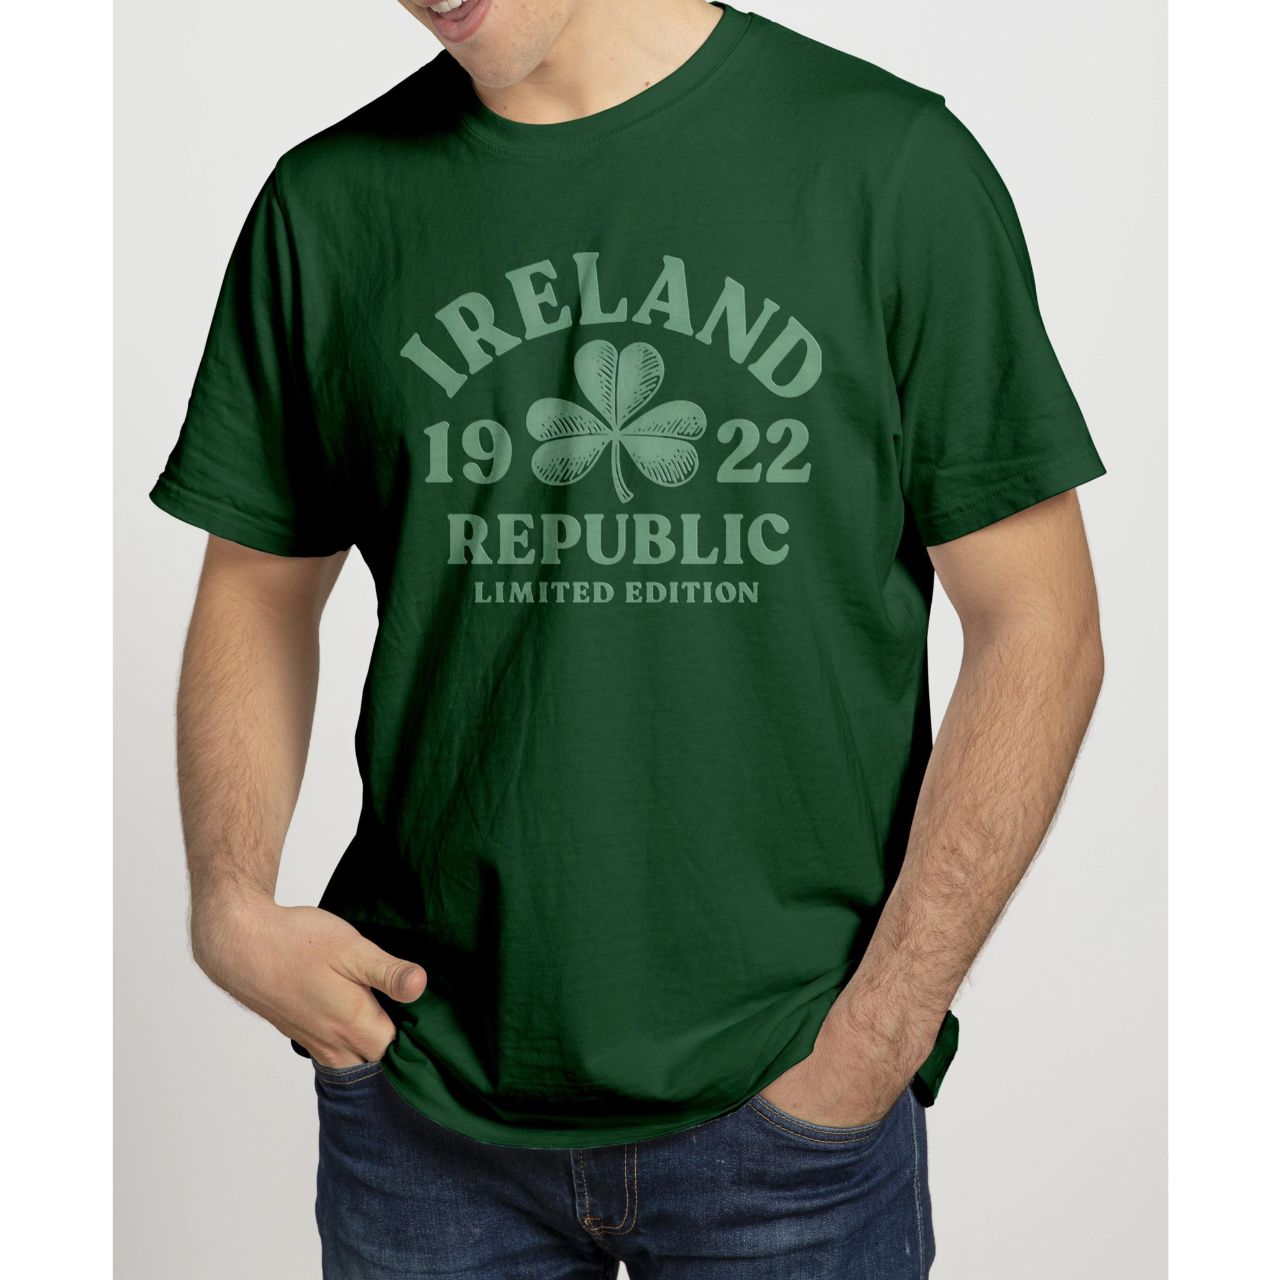 Cara Craft Ireland Bottle Green Embossed 1922 T-Shirt  - 100% cotton - Ash 99% cotton,1% polyester - Heather Grey 97% cotton, 3% polyester - Crew Neck - Designed And Printed in Ireland By Cara craft - Machine Washable